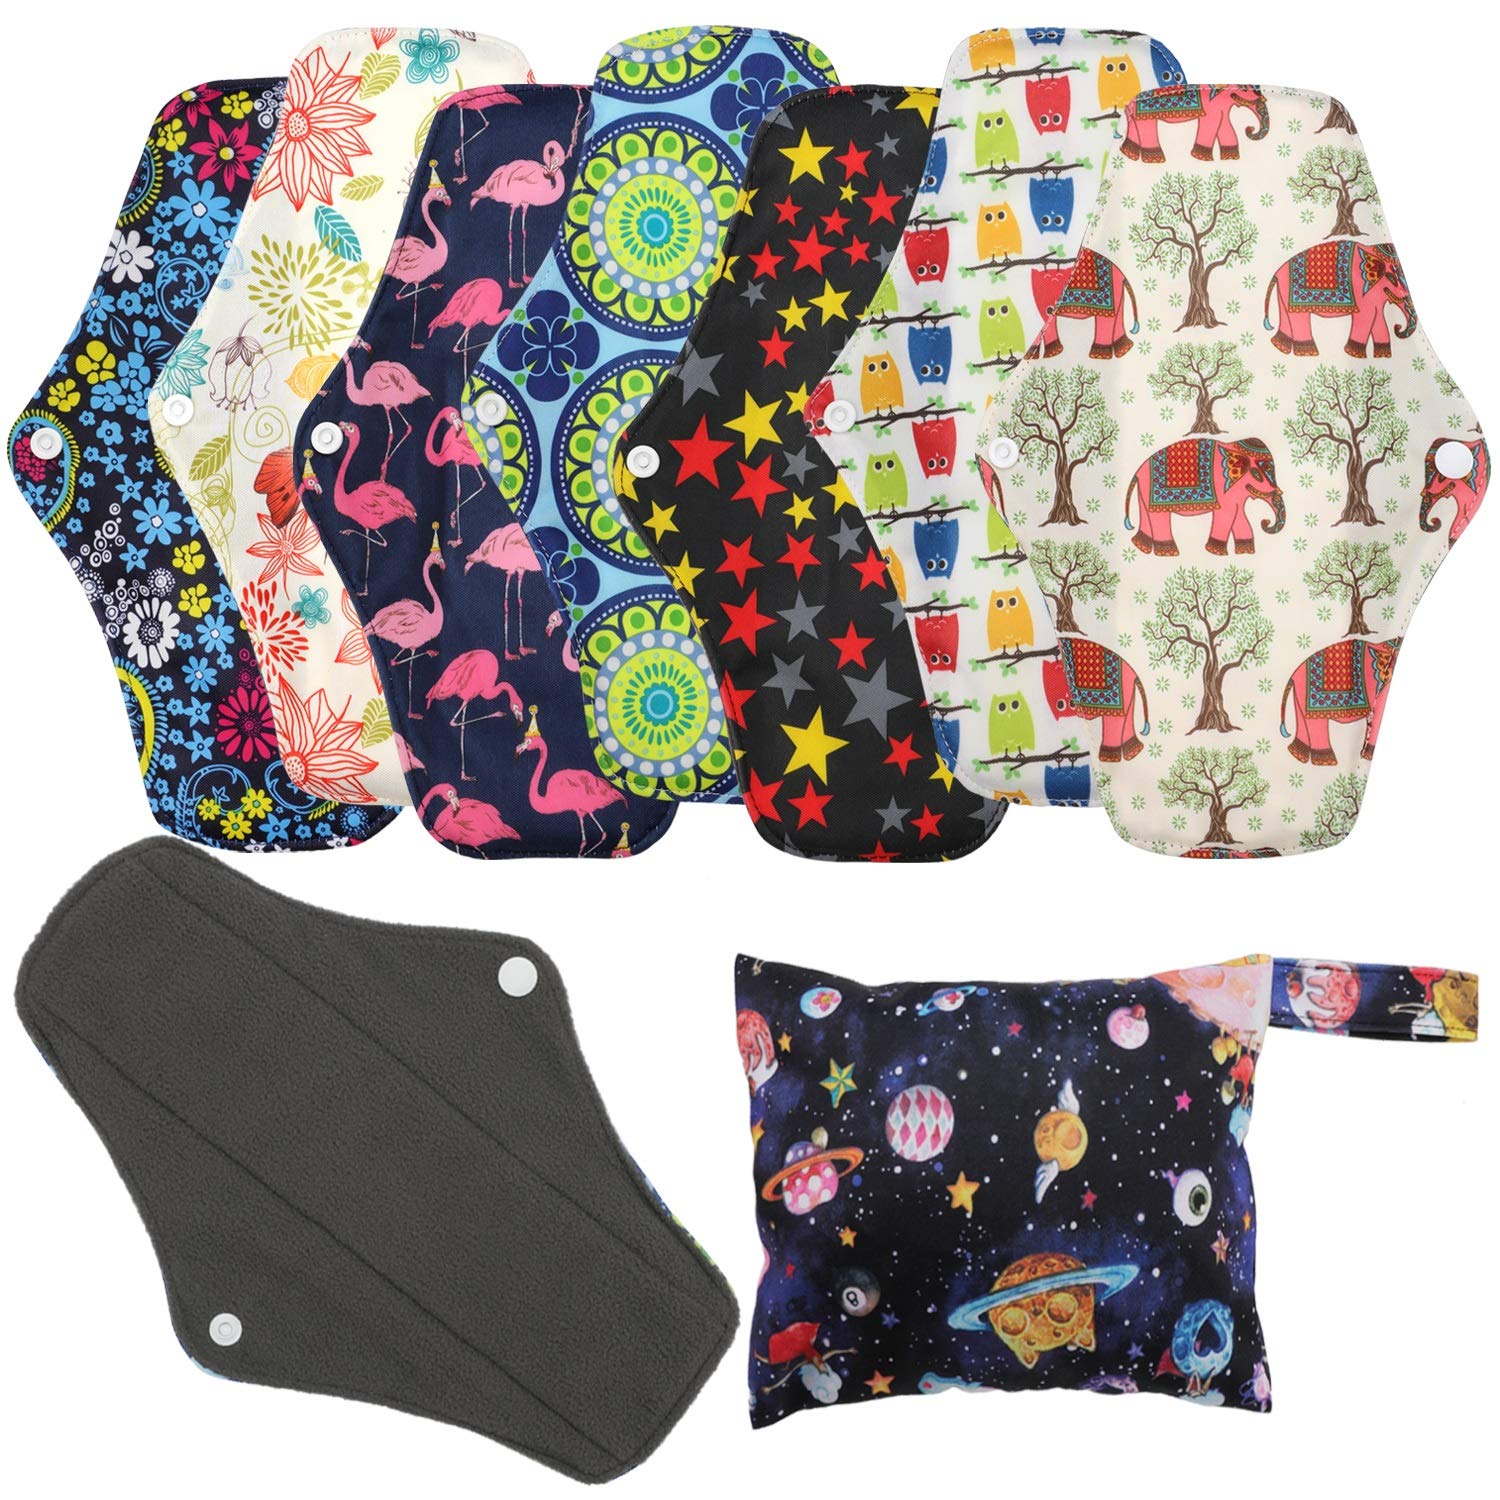 Reusable Menstrual Pads (7 in 1, 10in*7in), PHOGARY Bamboo Cloth